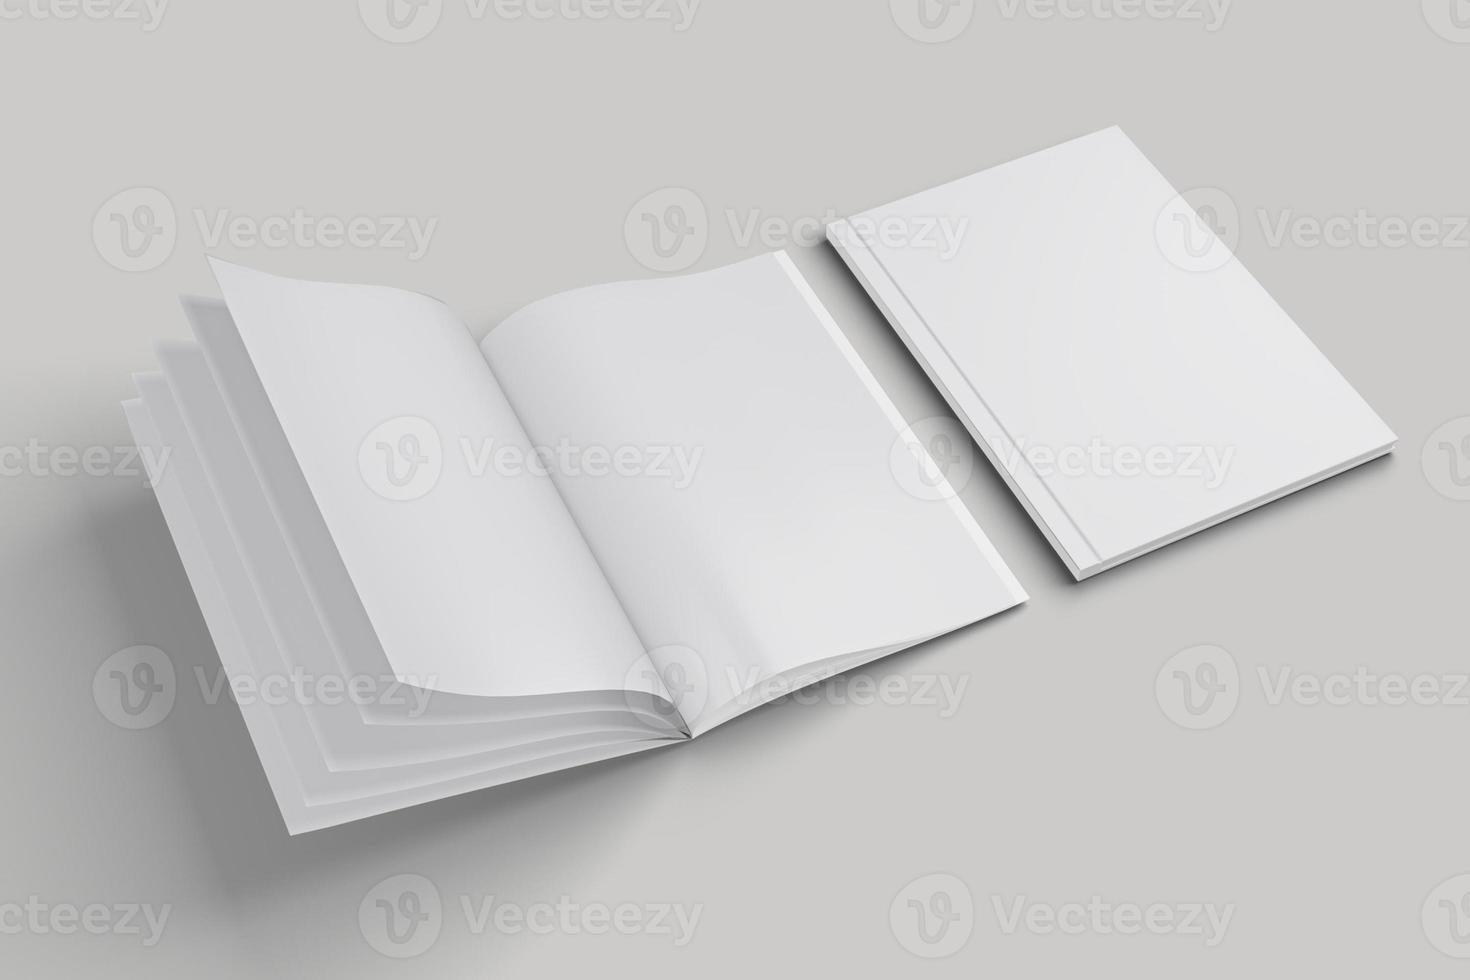 solated magazine with front cover and book pages photo